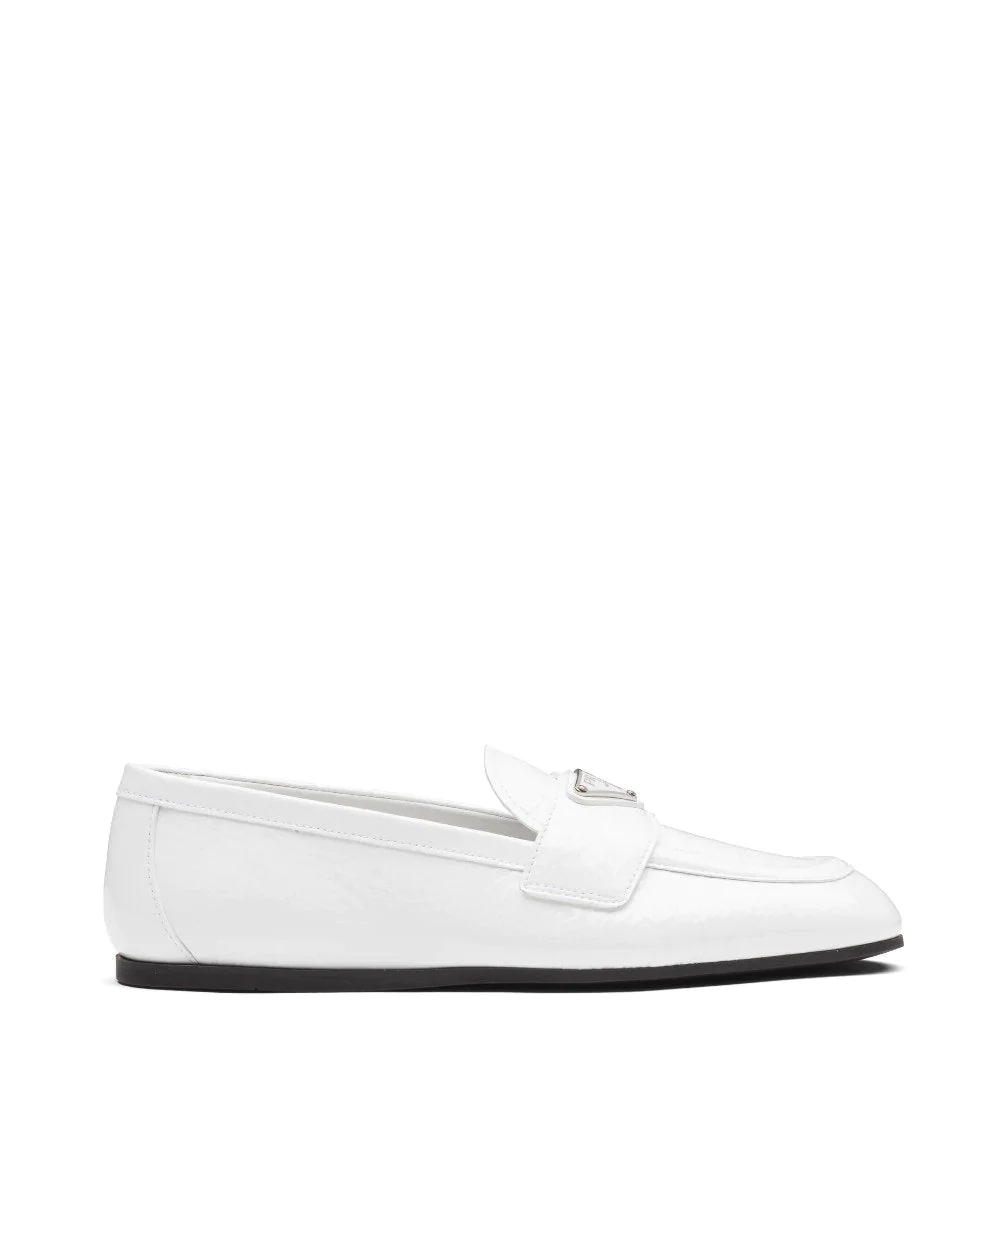 Prada Patent Leather Loafers, White